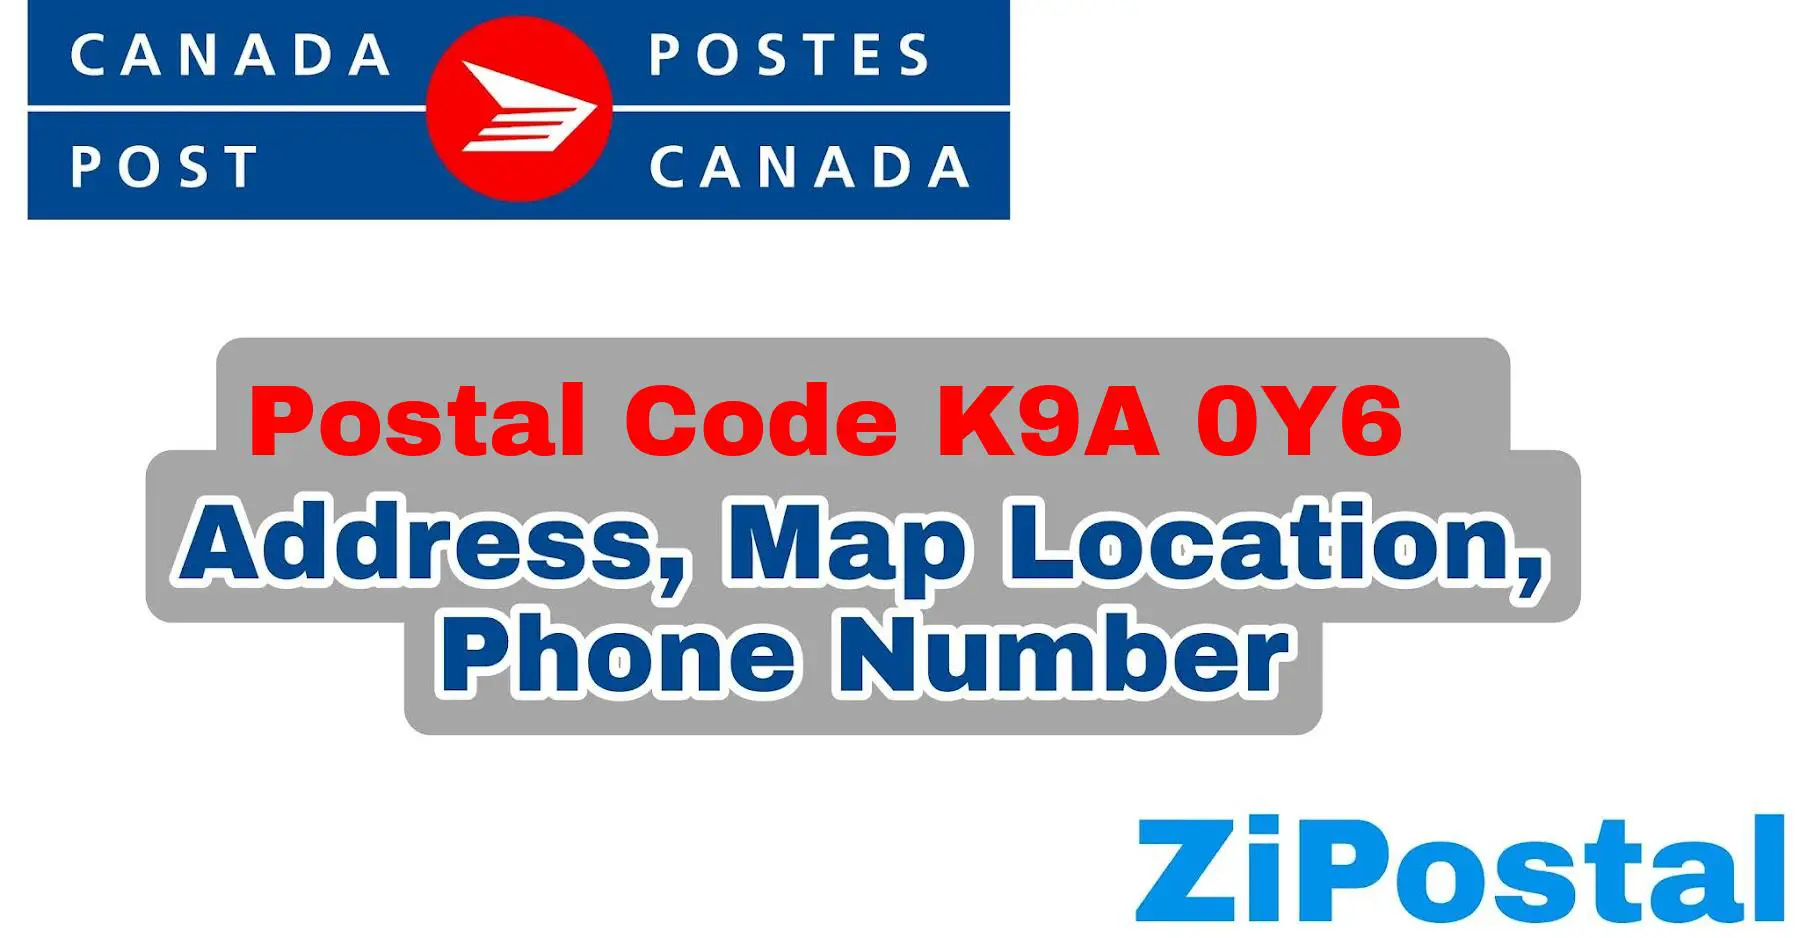 Postal Code K9A 0Y6 Address Map Location and Phone Number